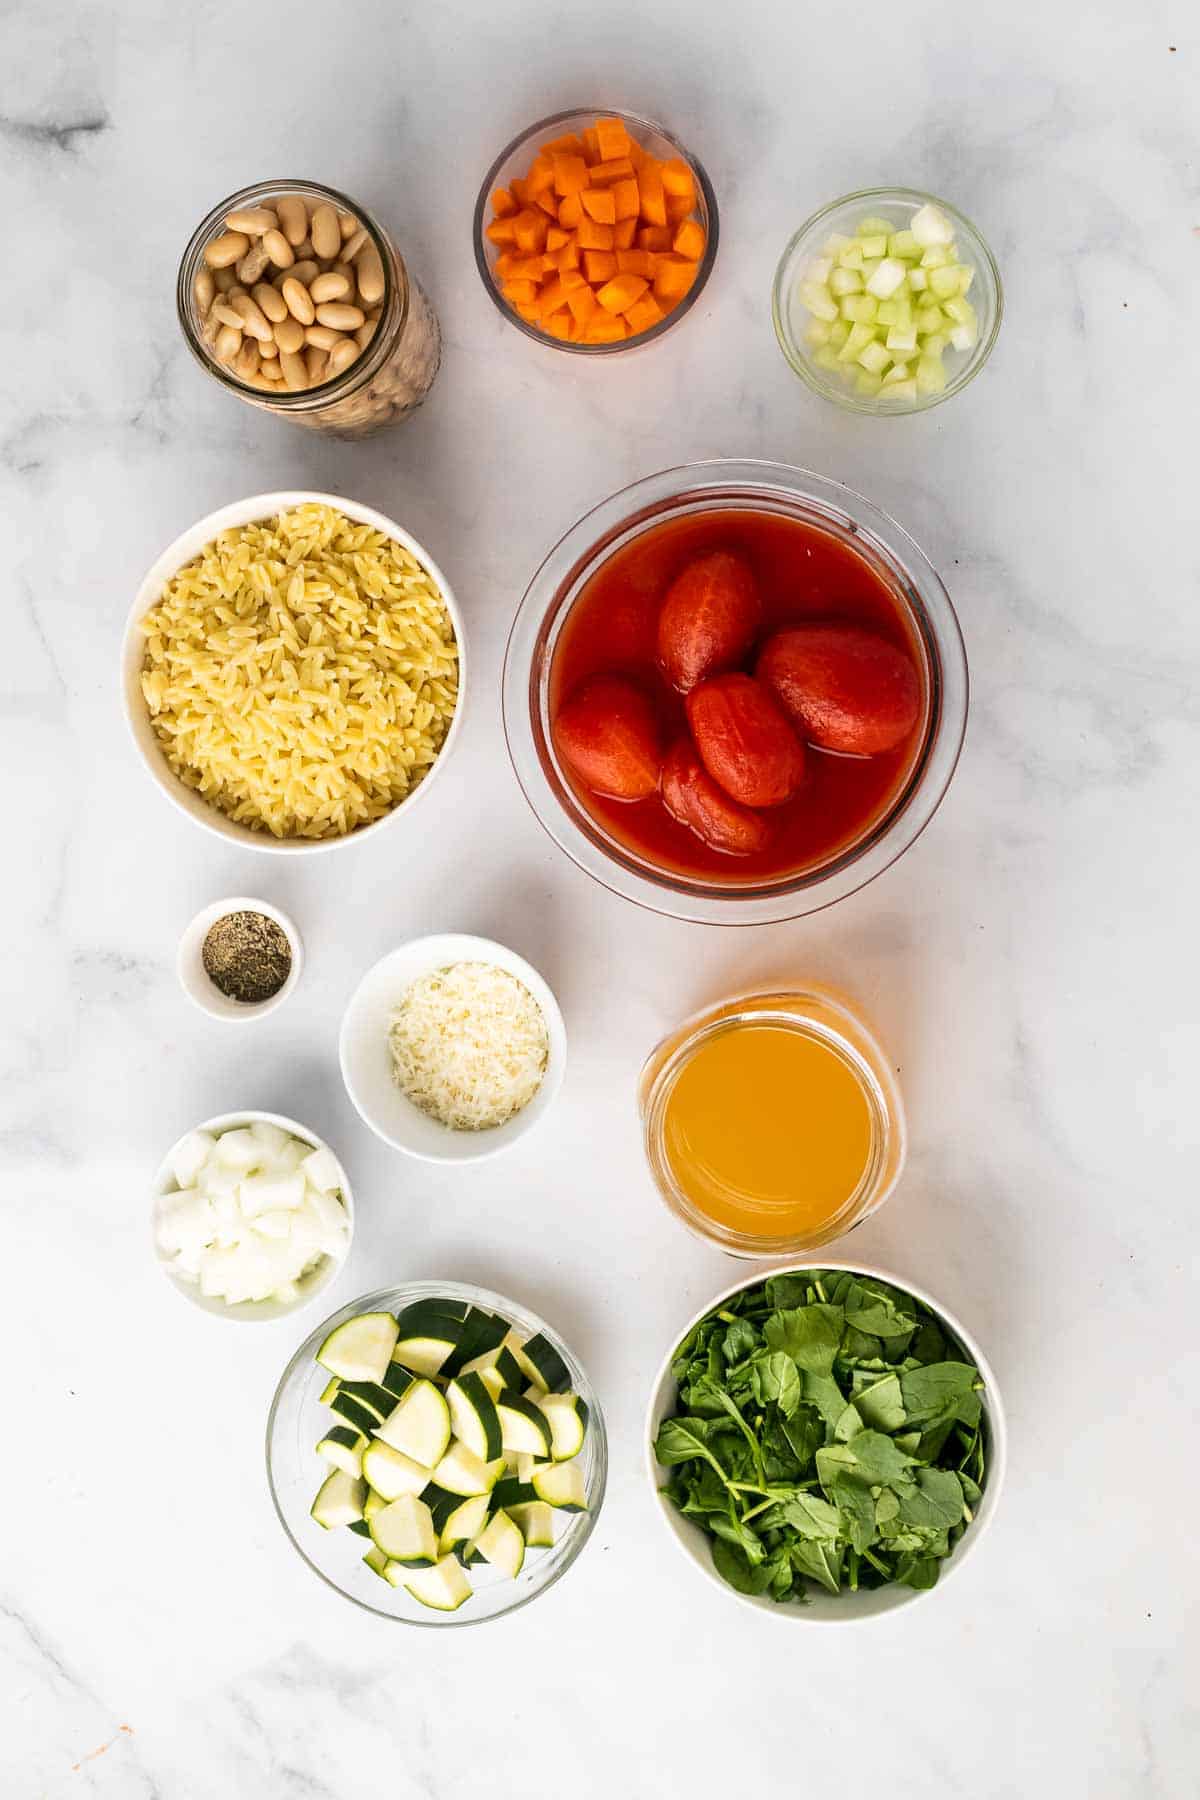 Ingredients for the recipe laid out on a marble surface